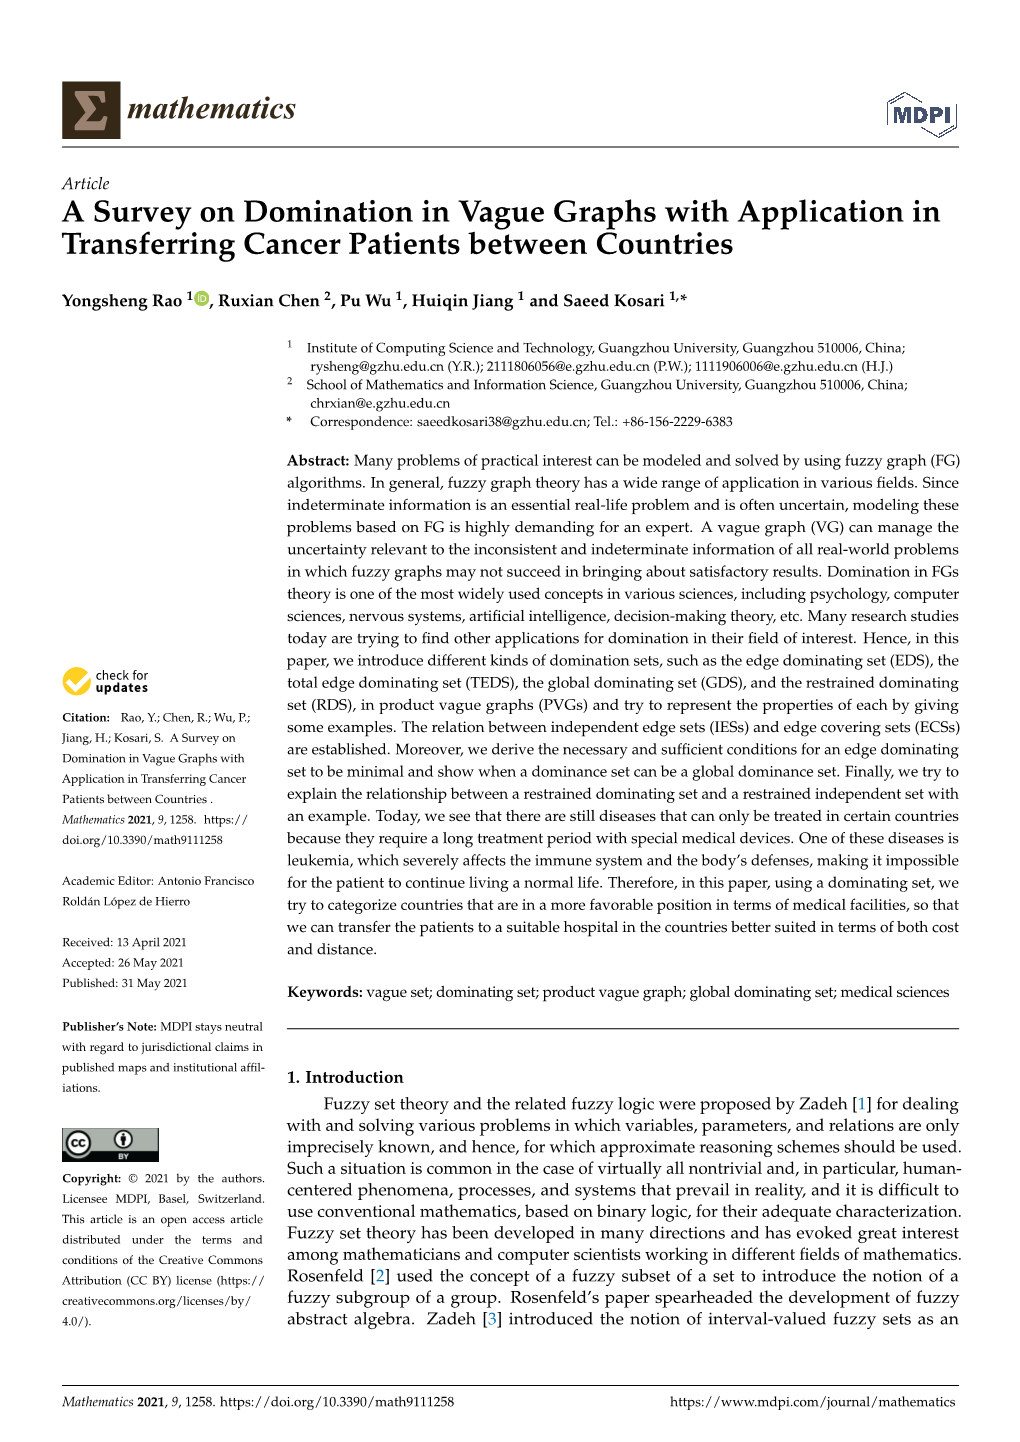 A Survey on Domination in Vague Graphs with Application in Transferring Cancer Patients Between Countries